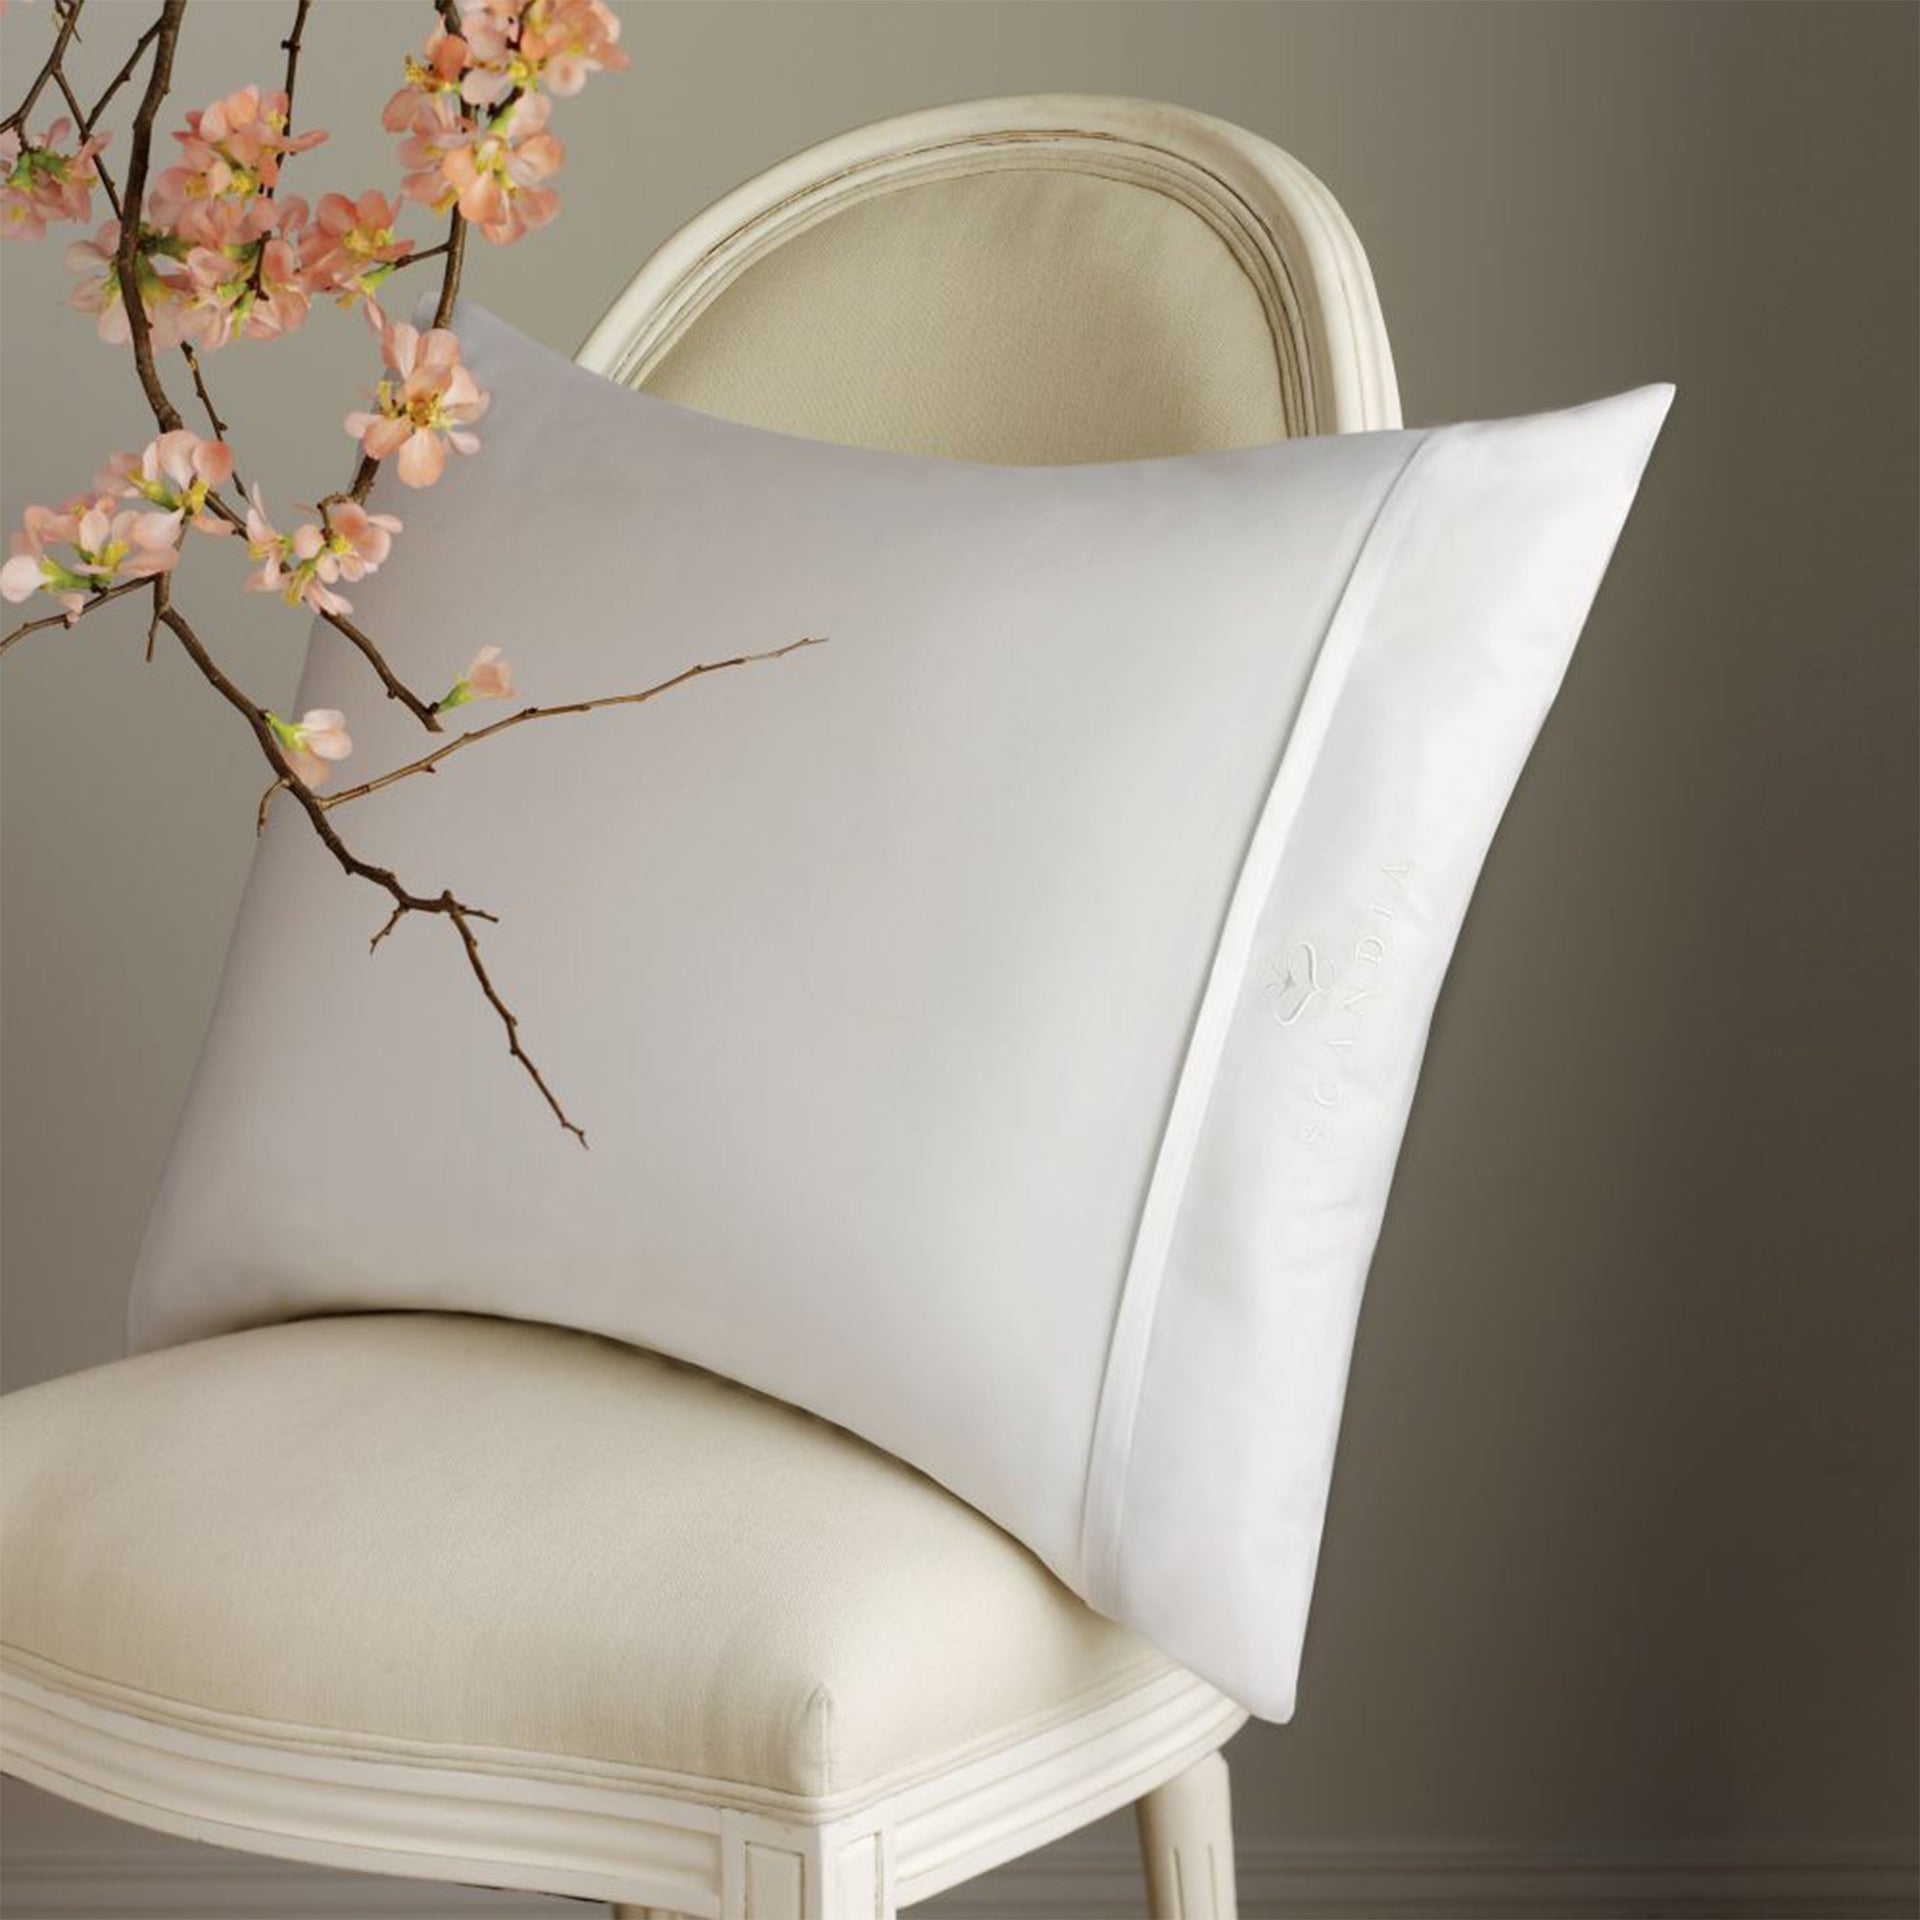 Pillow covered with our Sateen pillow protector, zipped closed showing Scandia Crest embroidery